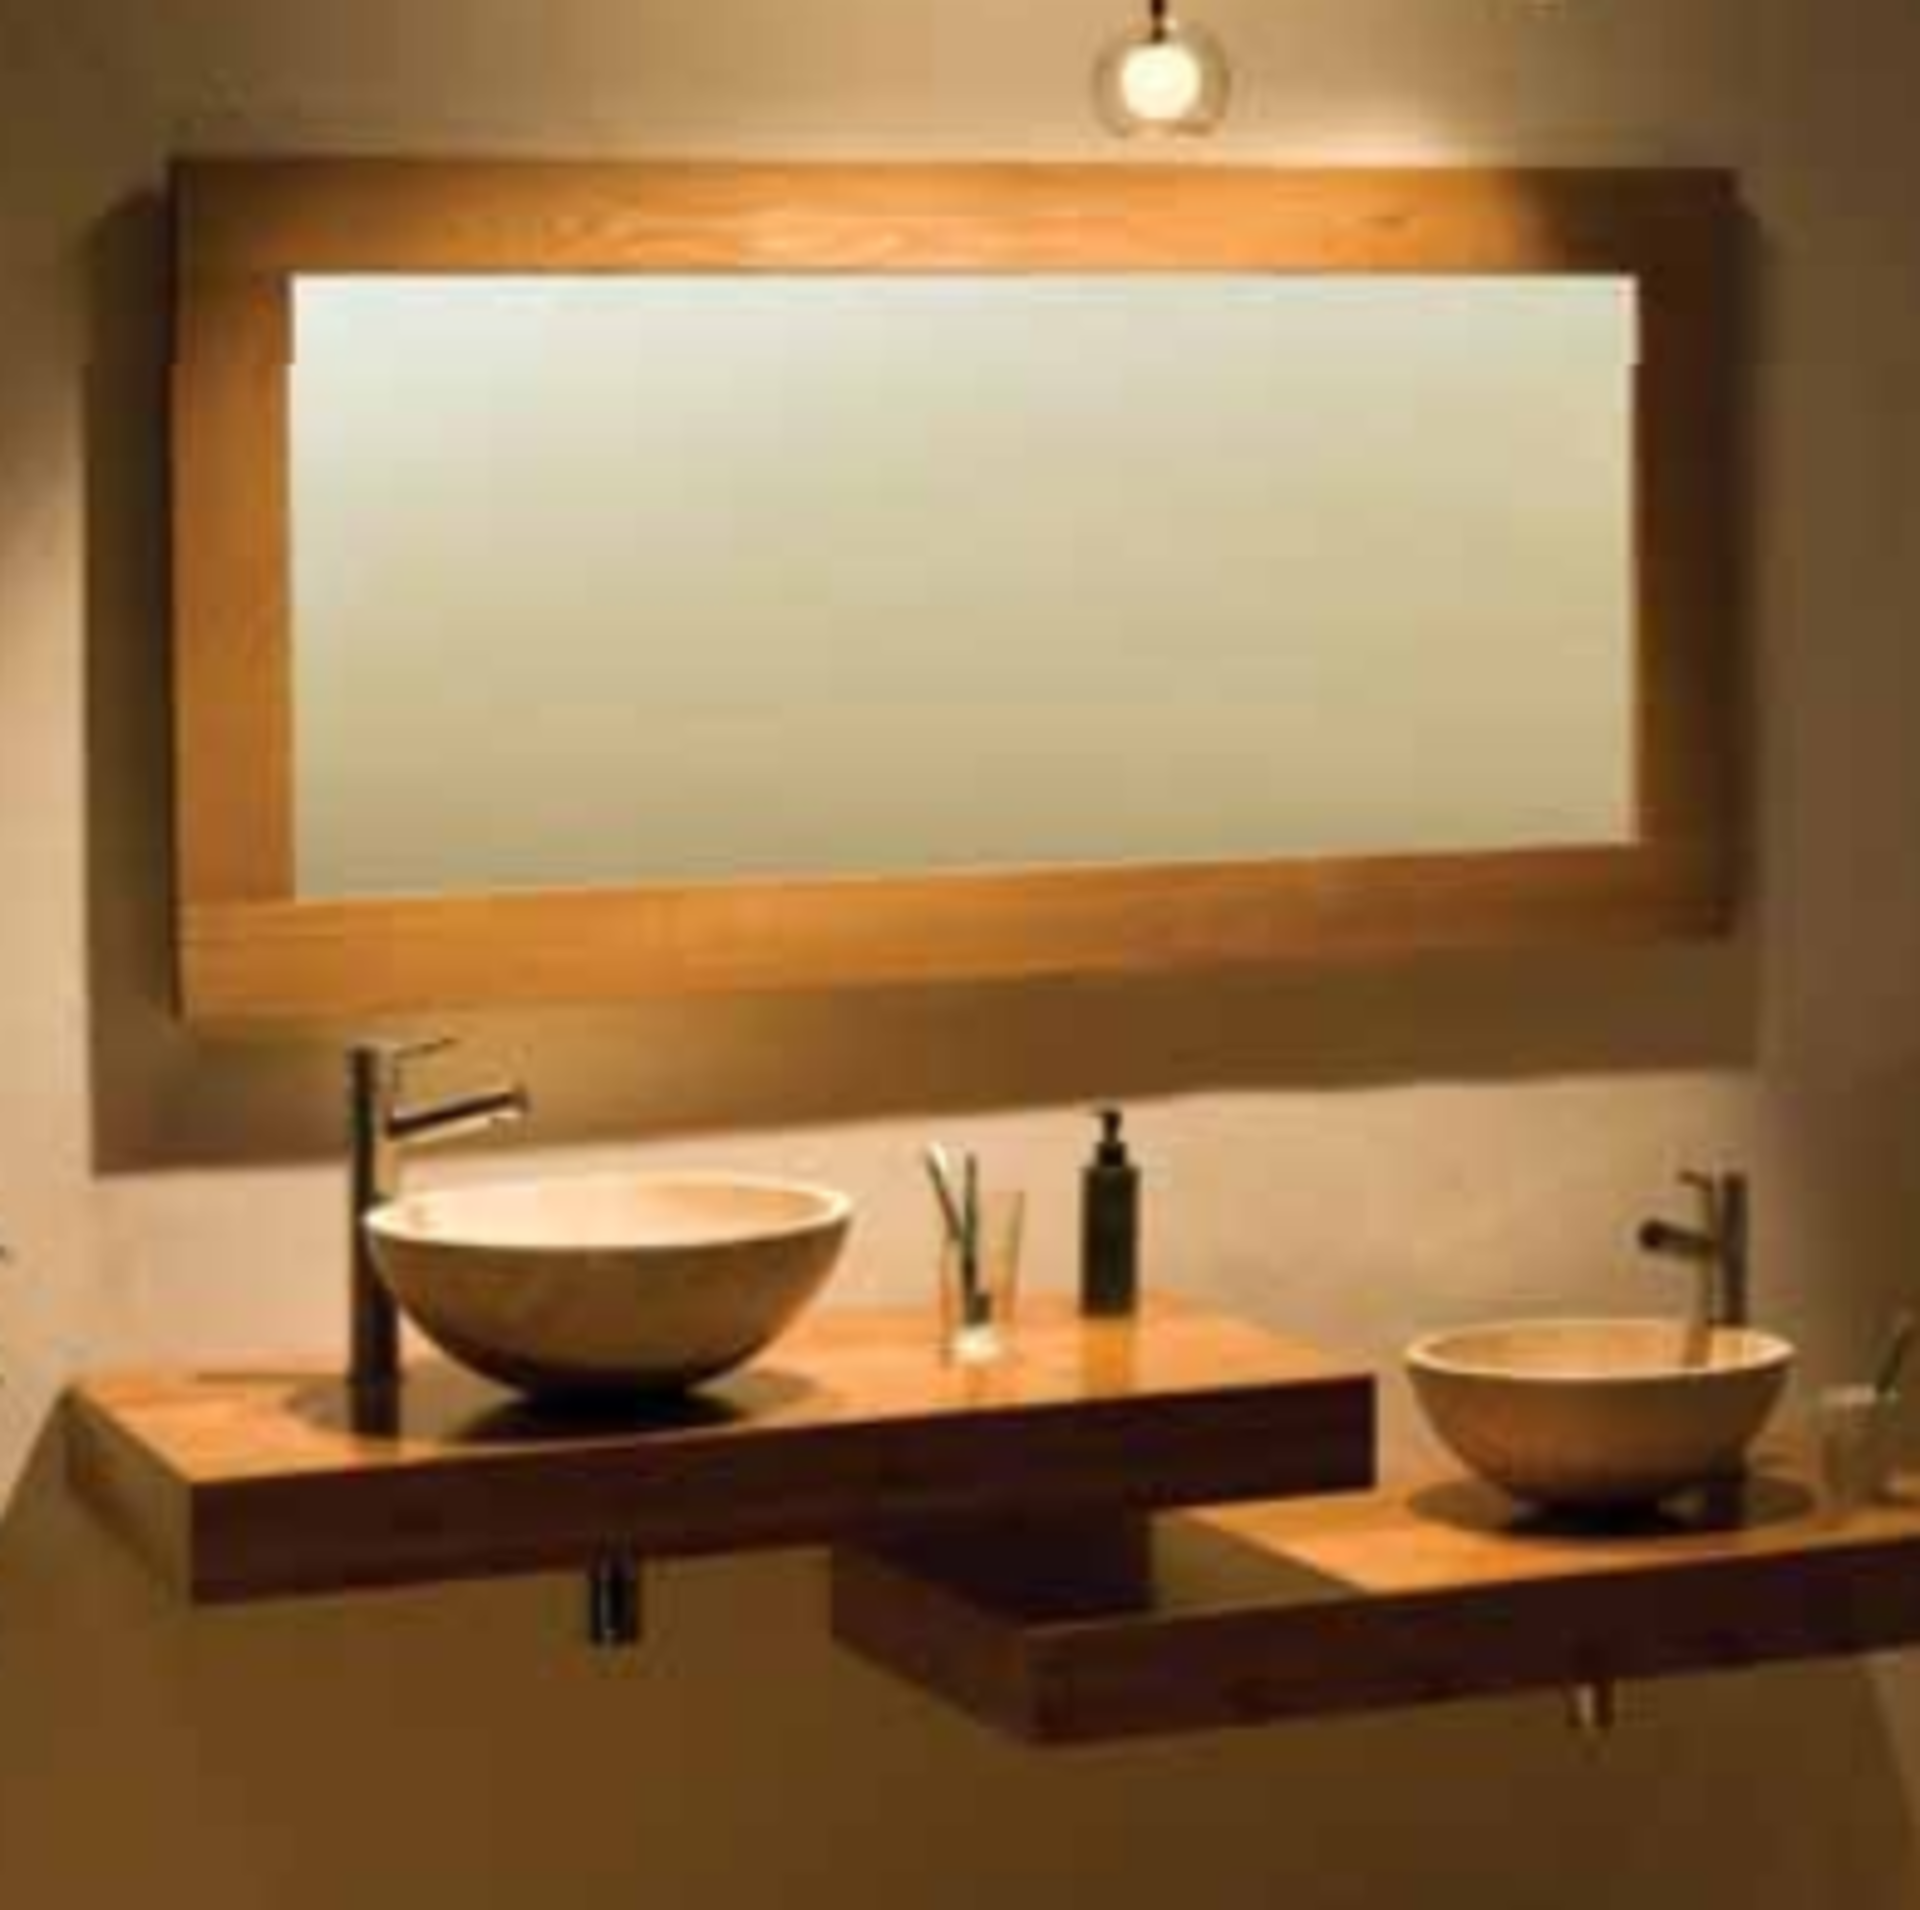 1 x Stonearth Bathroom Wall Mirror With Solid Walnut Frame and Bevelled Glass Mirror - Size Ex Large - Image 2 of 12